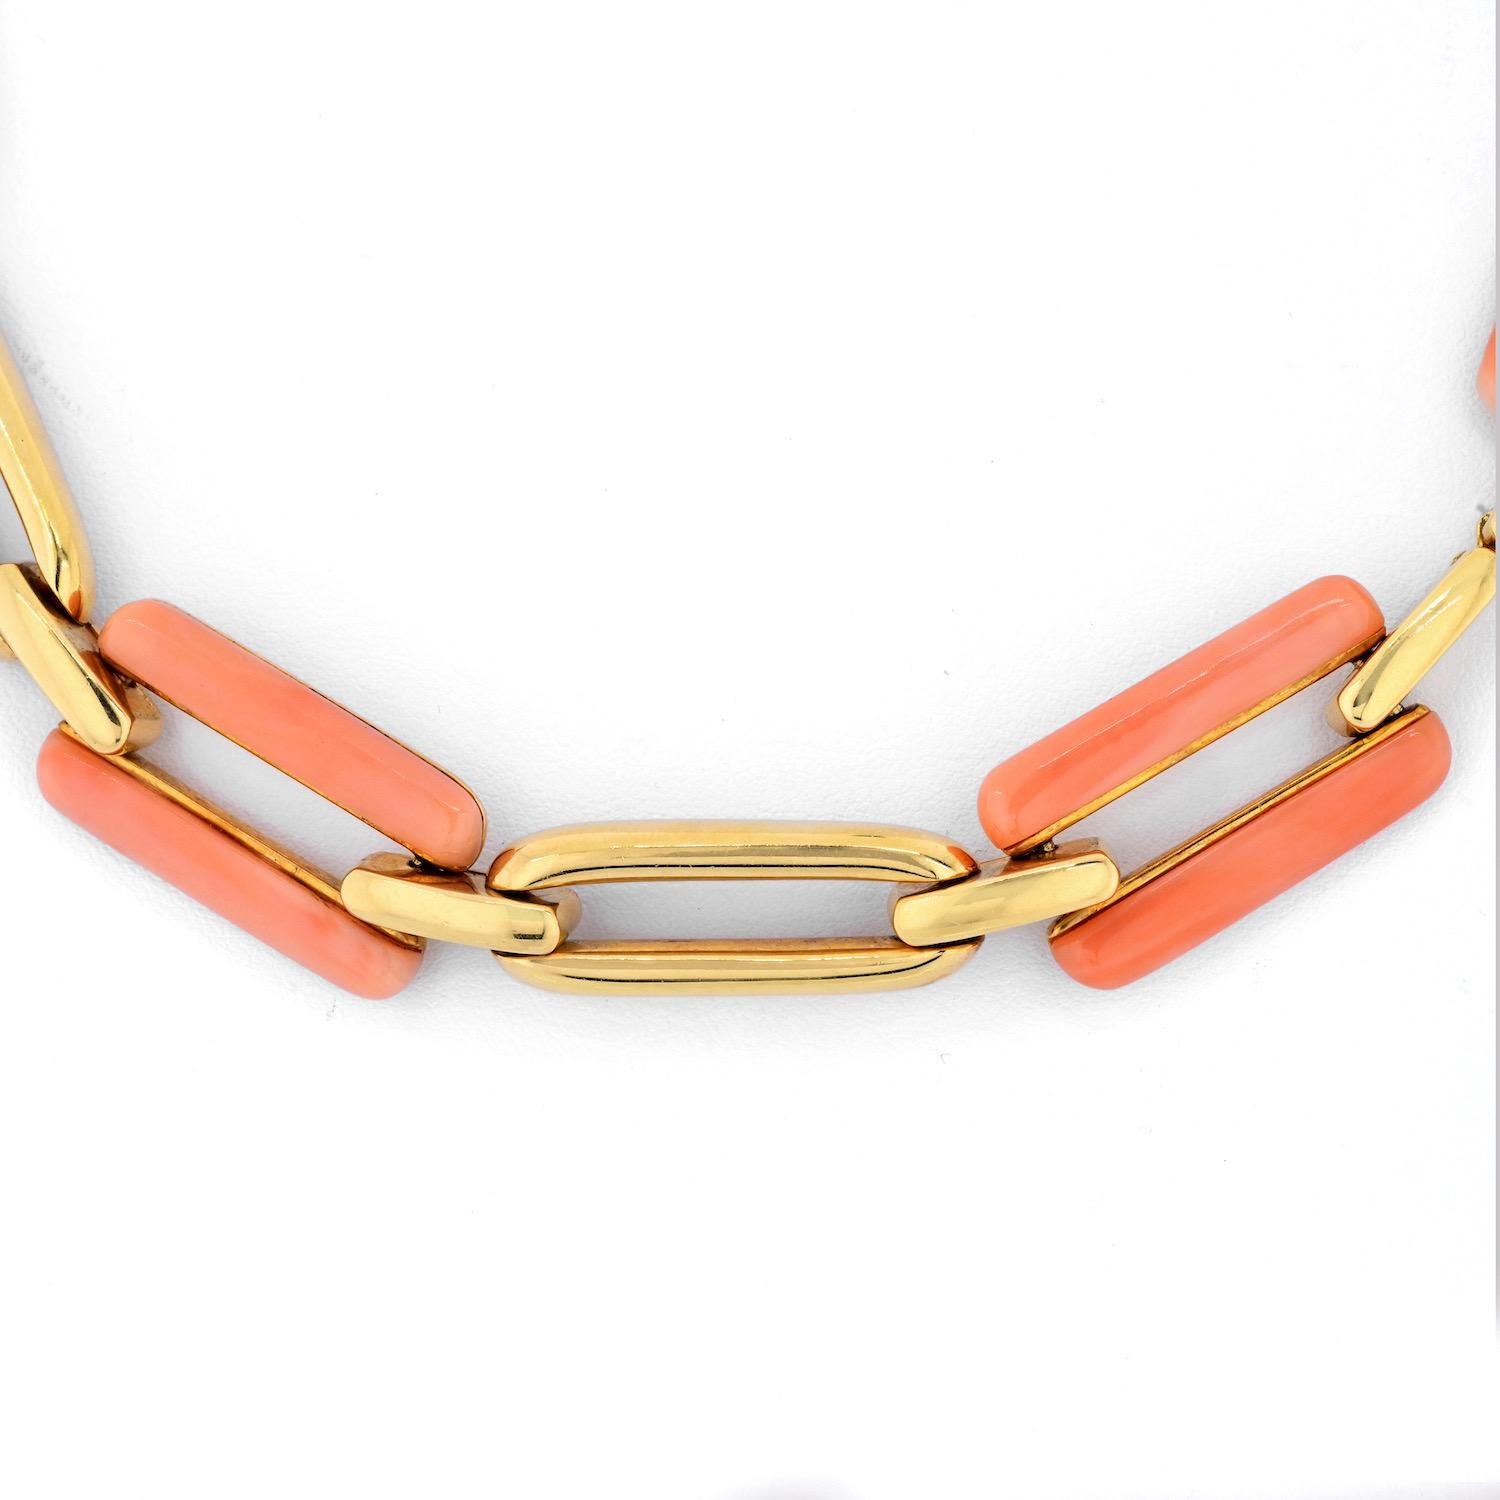 David Webb 18K Yellow Gold Pink Coral And Gold Link Convertible Necklace.
Lovely link necklace 20 inches long will be a perfect addition to your summer outfit. This necklace can also be worn as a bracelet.
